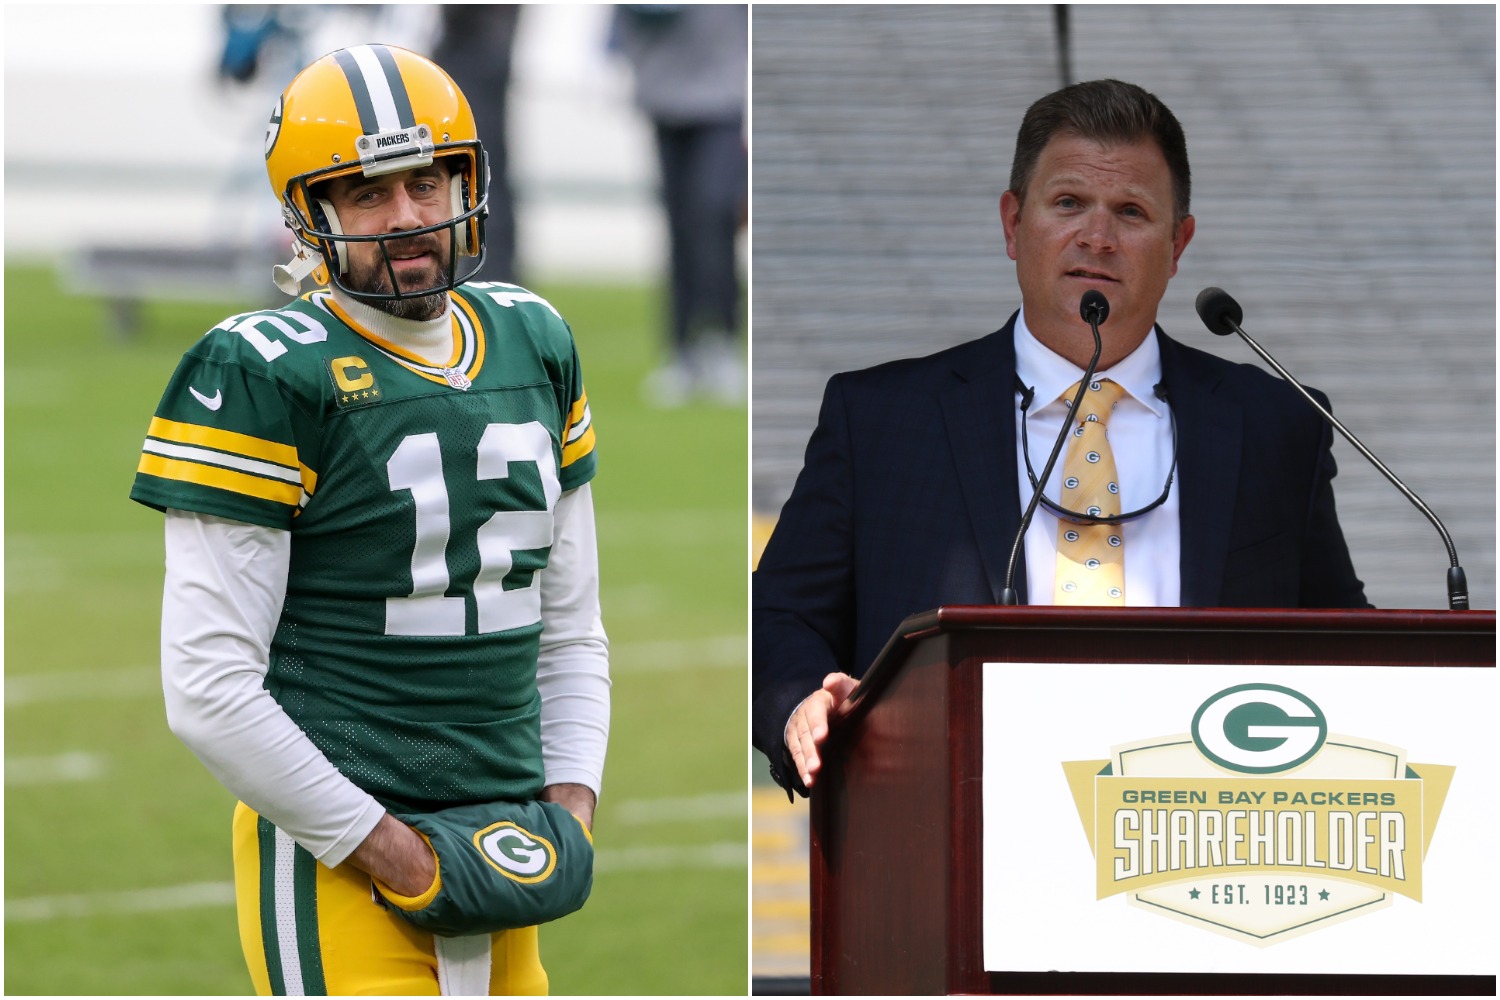 Aaron Rodgers looks on during a game (left) as Packers general manager Brian Gutekunst speaks to team shareholders (right).